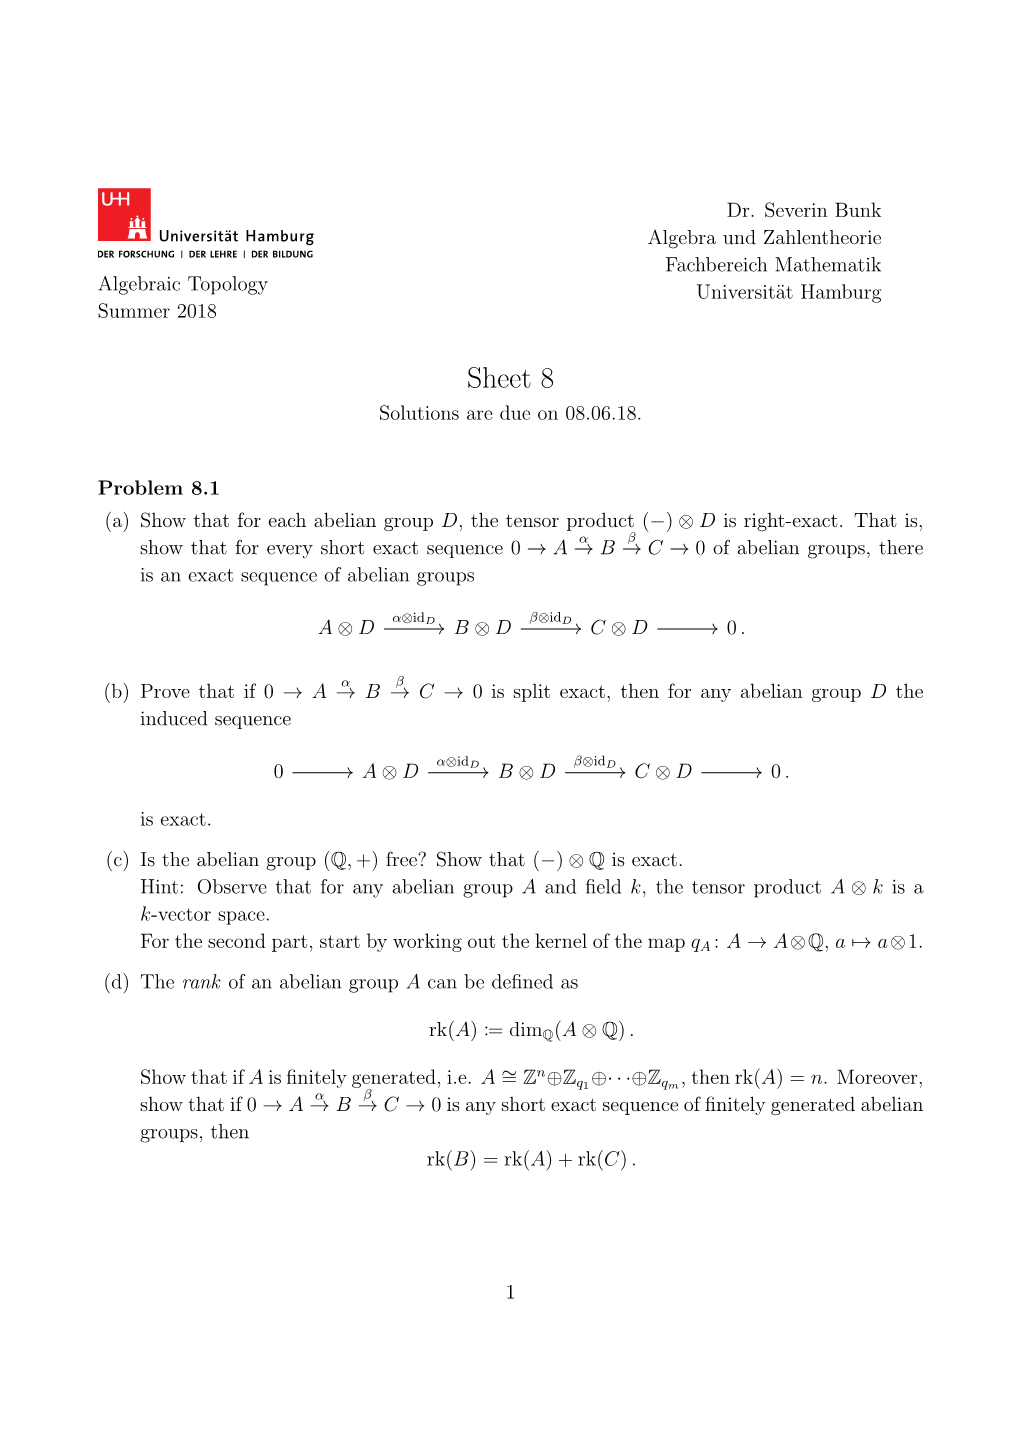 Sheet 8 Solutions Are Due on 08.06.18